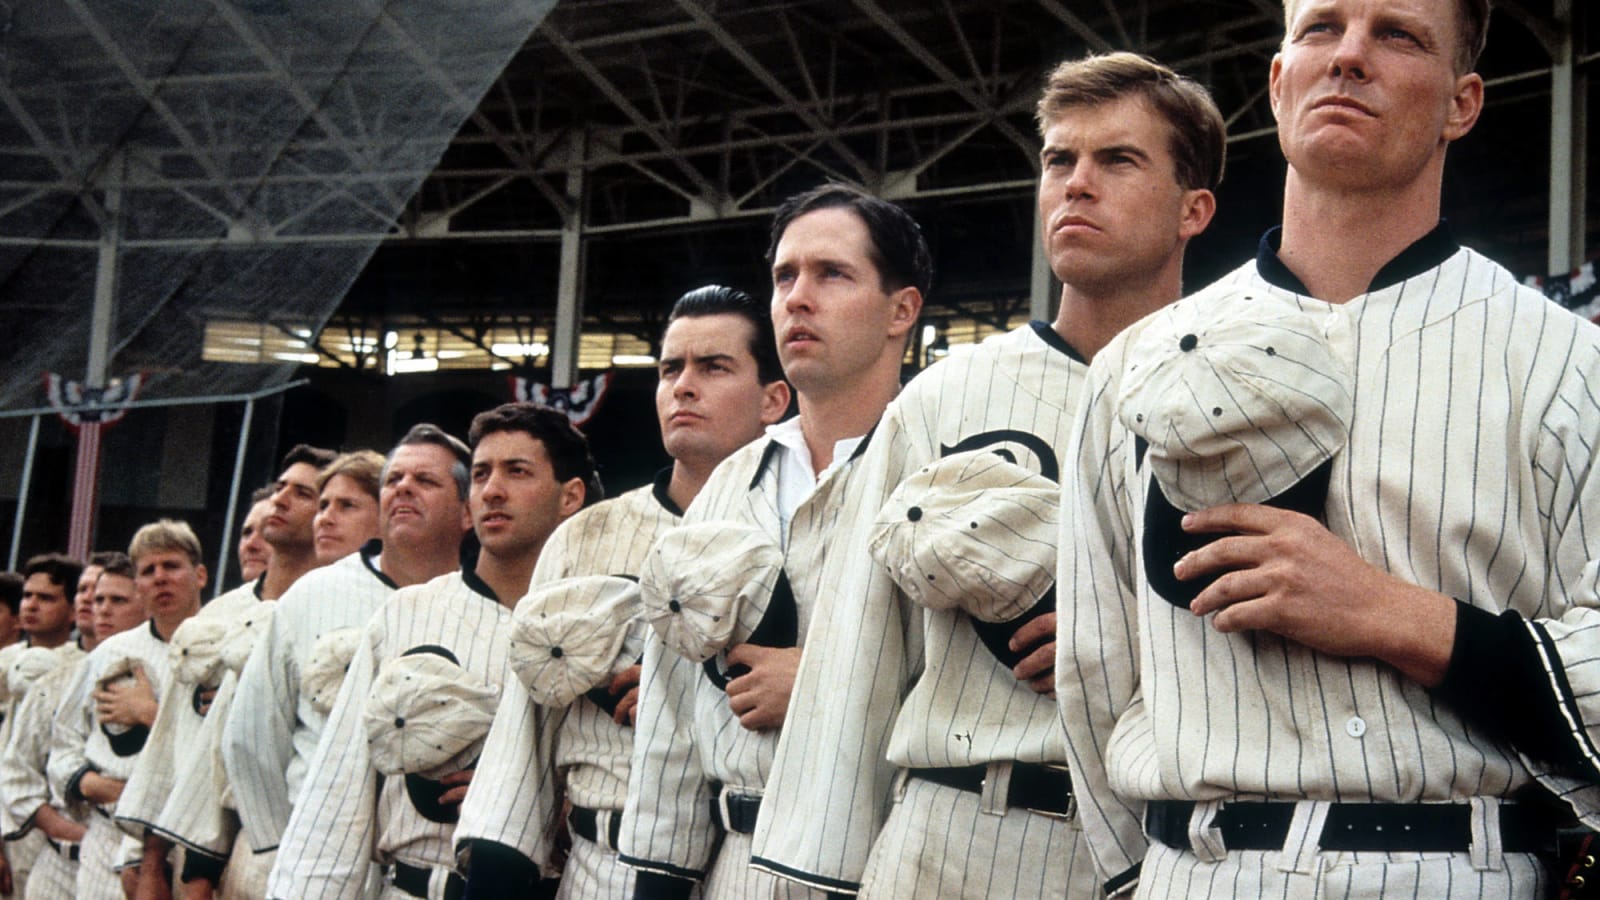 Ranking the 25 best baseball movies of all time